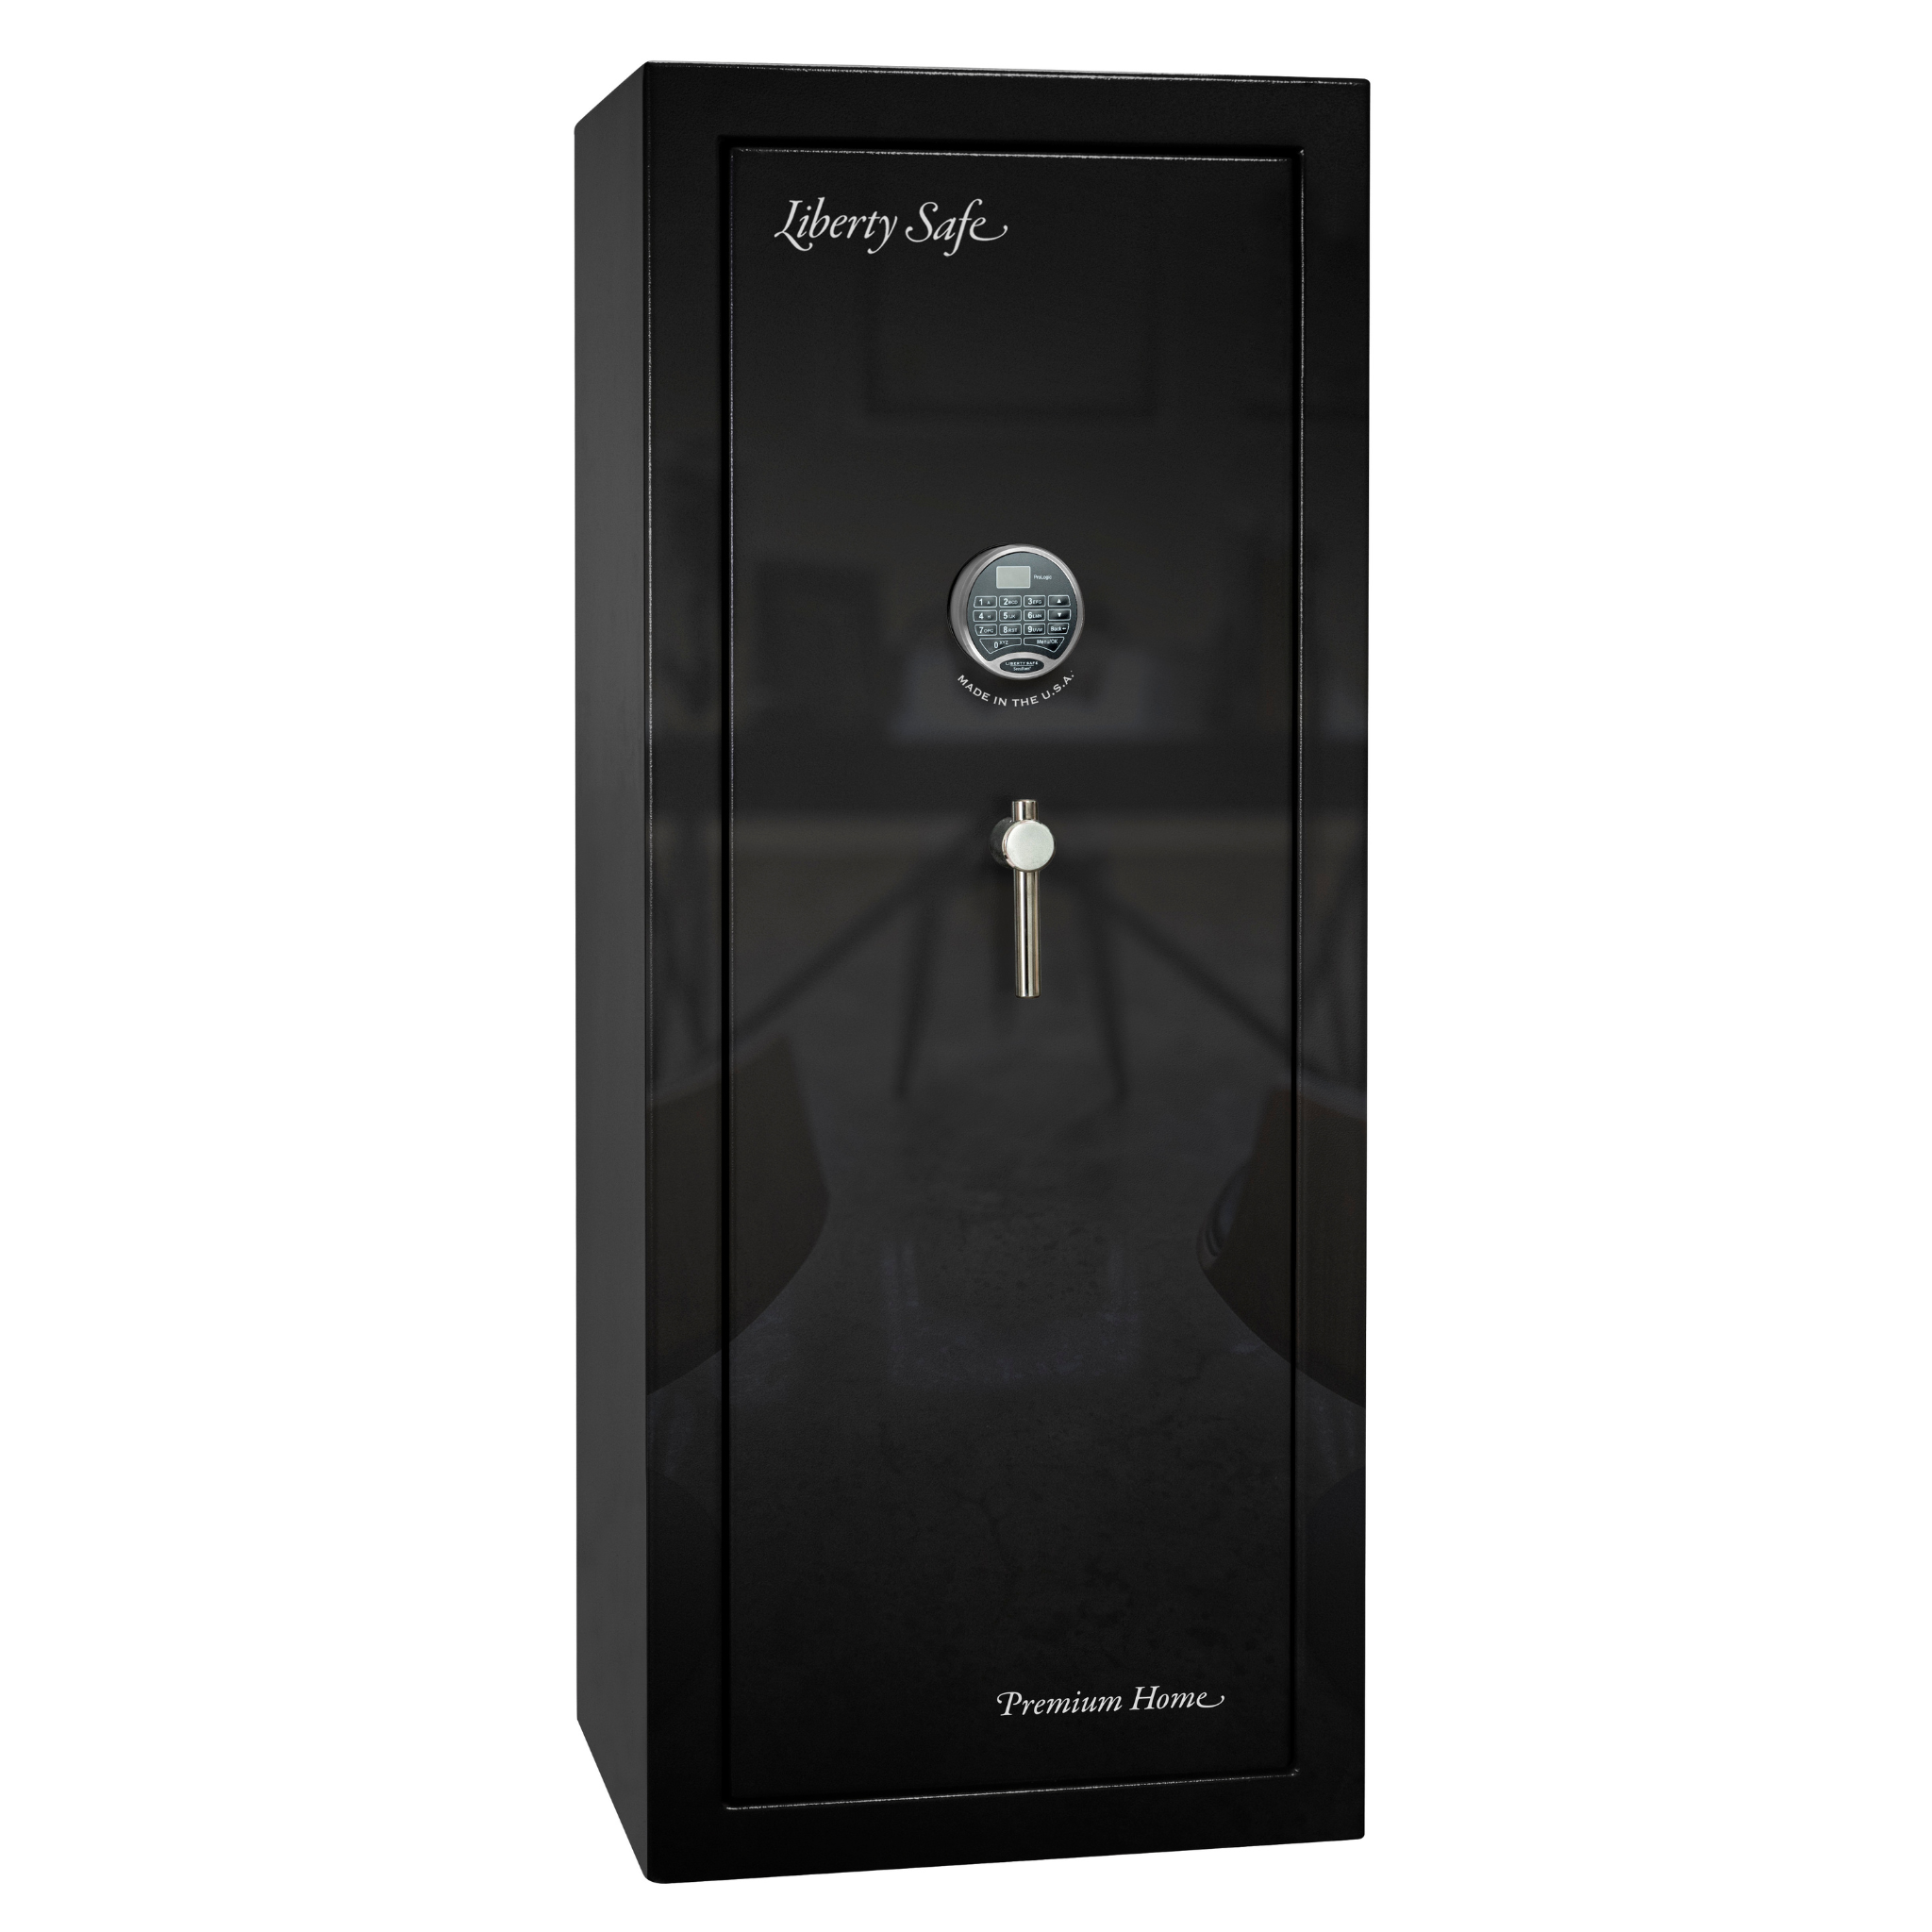 Premium Home Series | Level 7 Security | 2 Hour Fire Protection | 17 | Dimensions: 60.25"(H) x 24.5"(W) x 19"(D) | Black Gloss Chrome - Closed Door